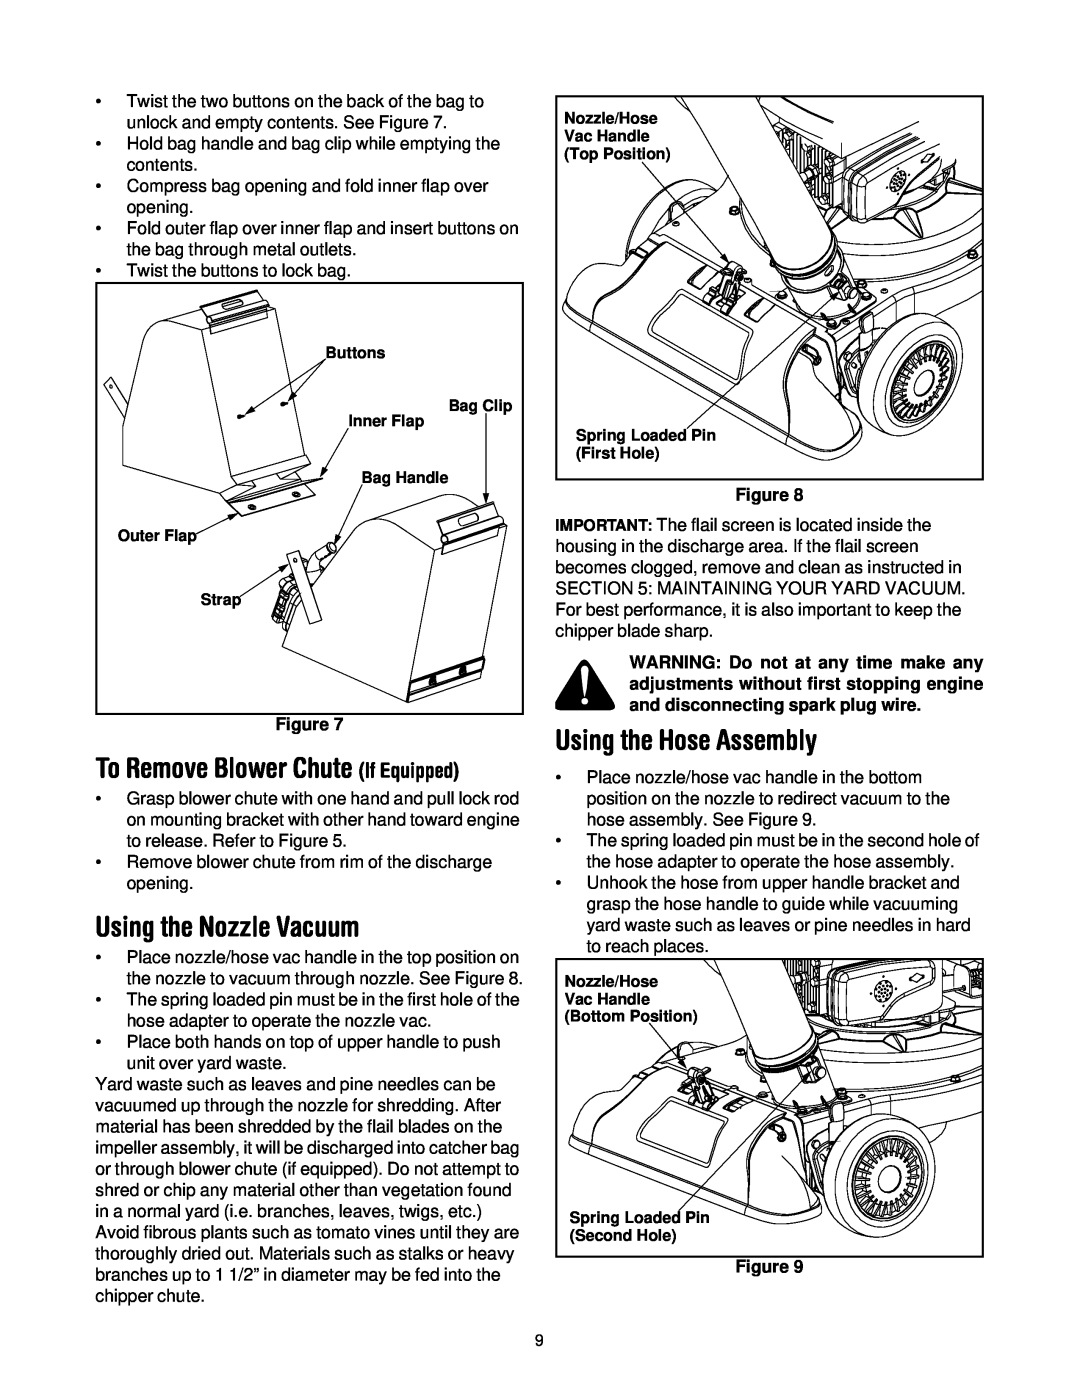 Troy-Bilt 24B-060F063 manual Using the Nozzle Vacuum, Using the Hose Assembly, To Remove Blower Chute If Equipped, Figure 